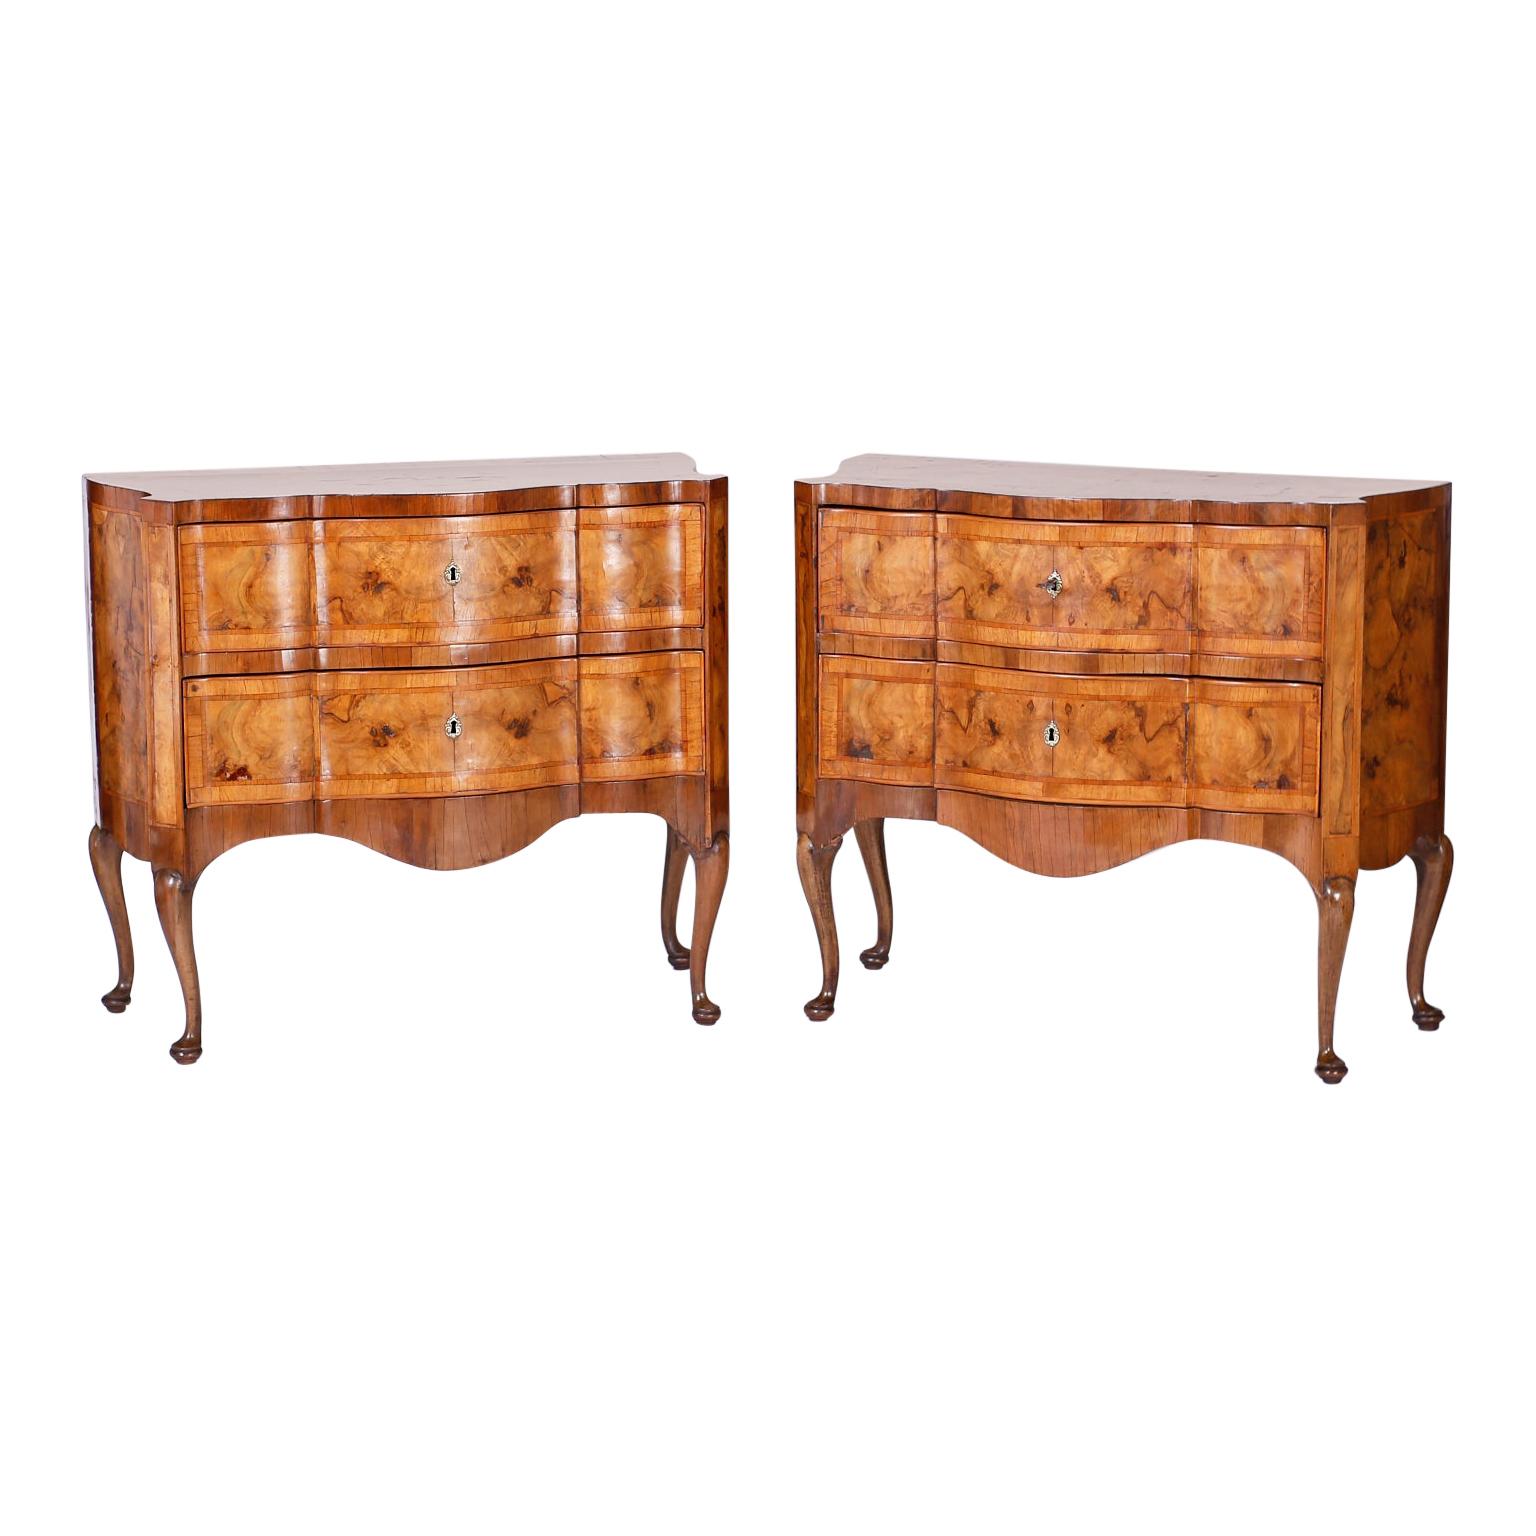 Pair of Italian Commodes or Chests